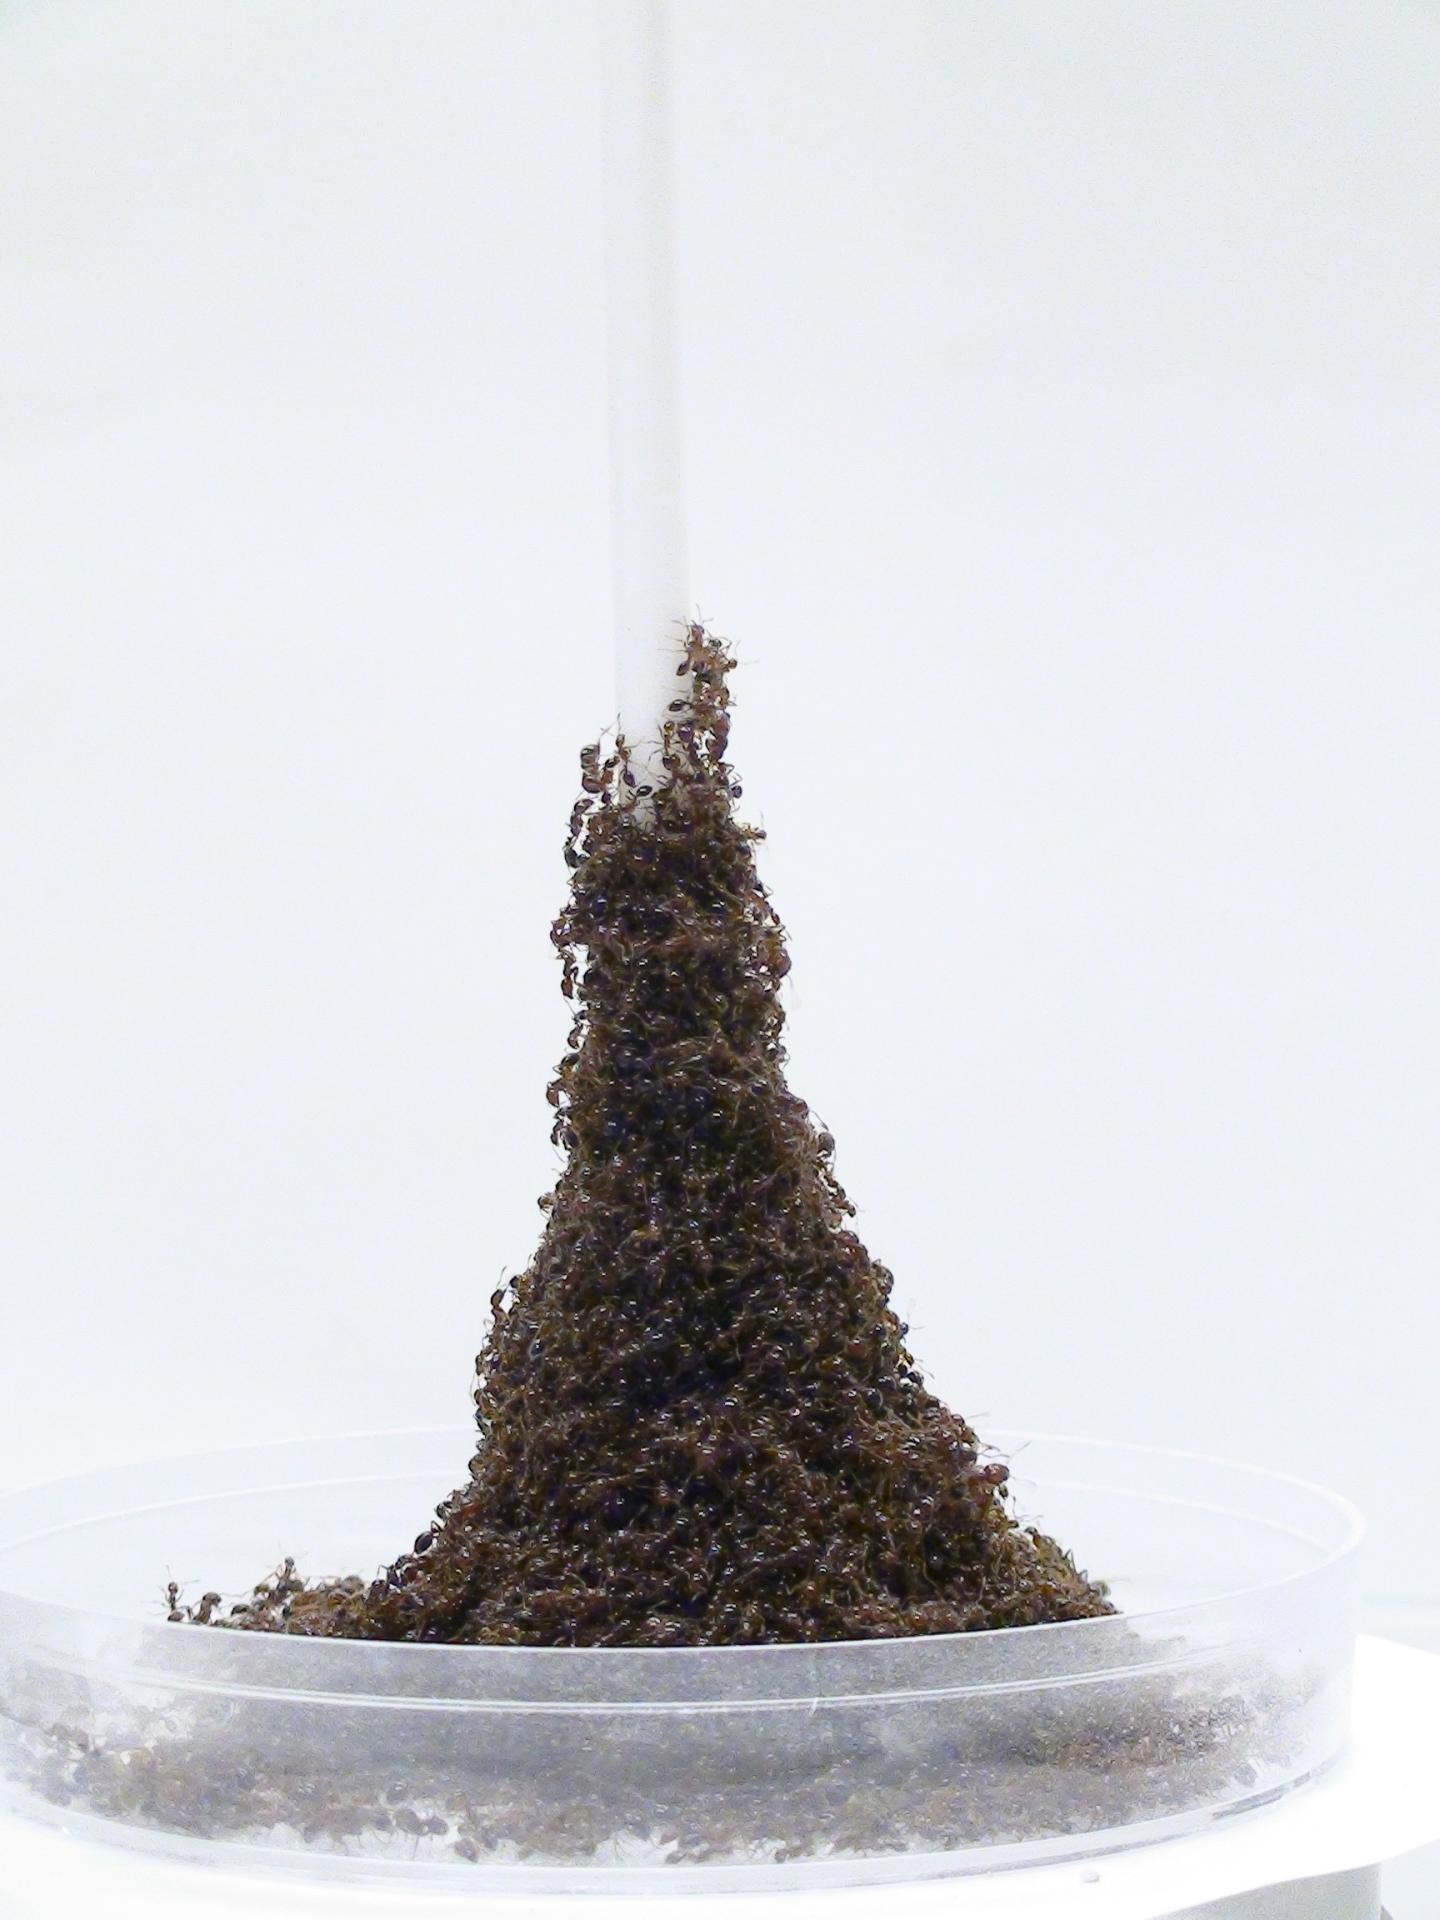 Ant Tower